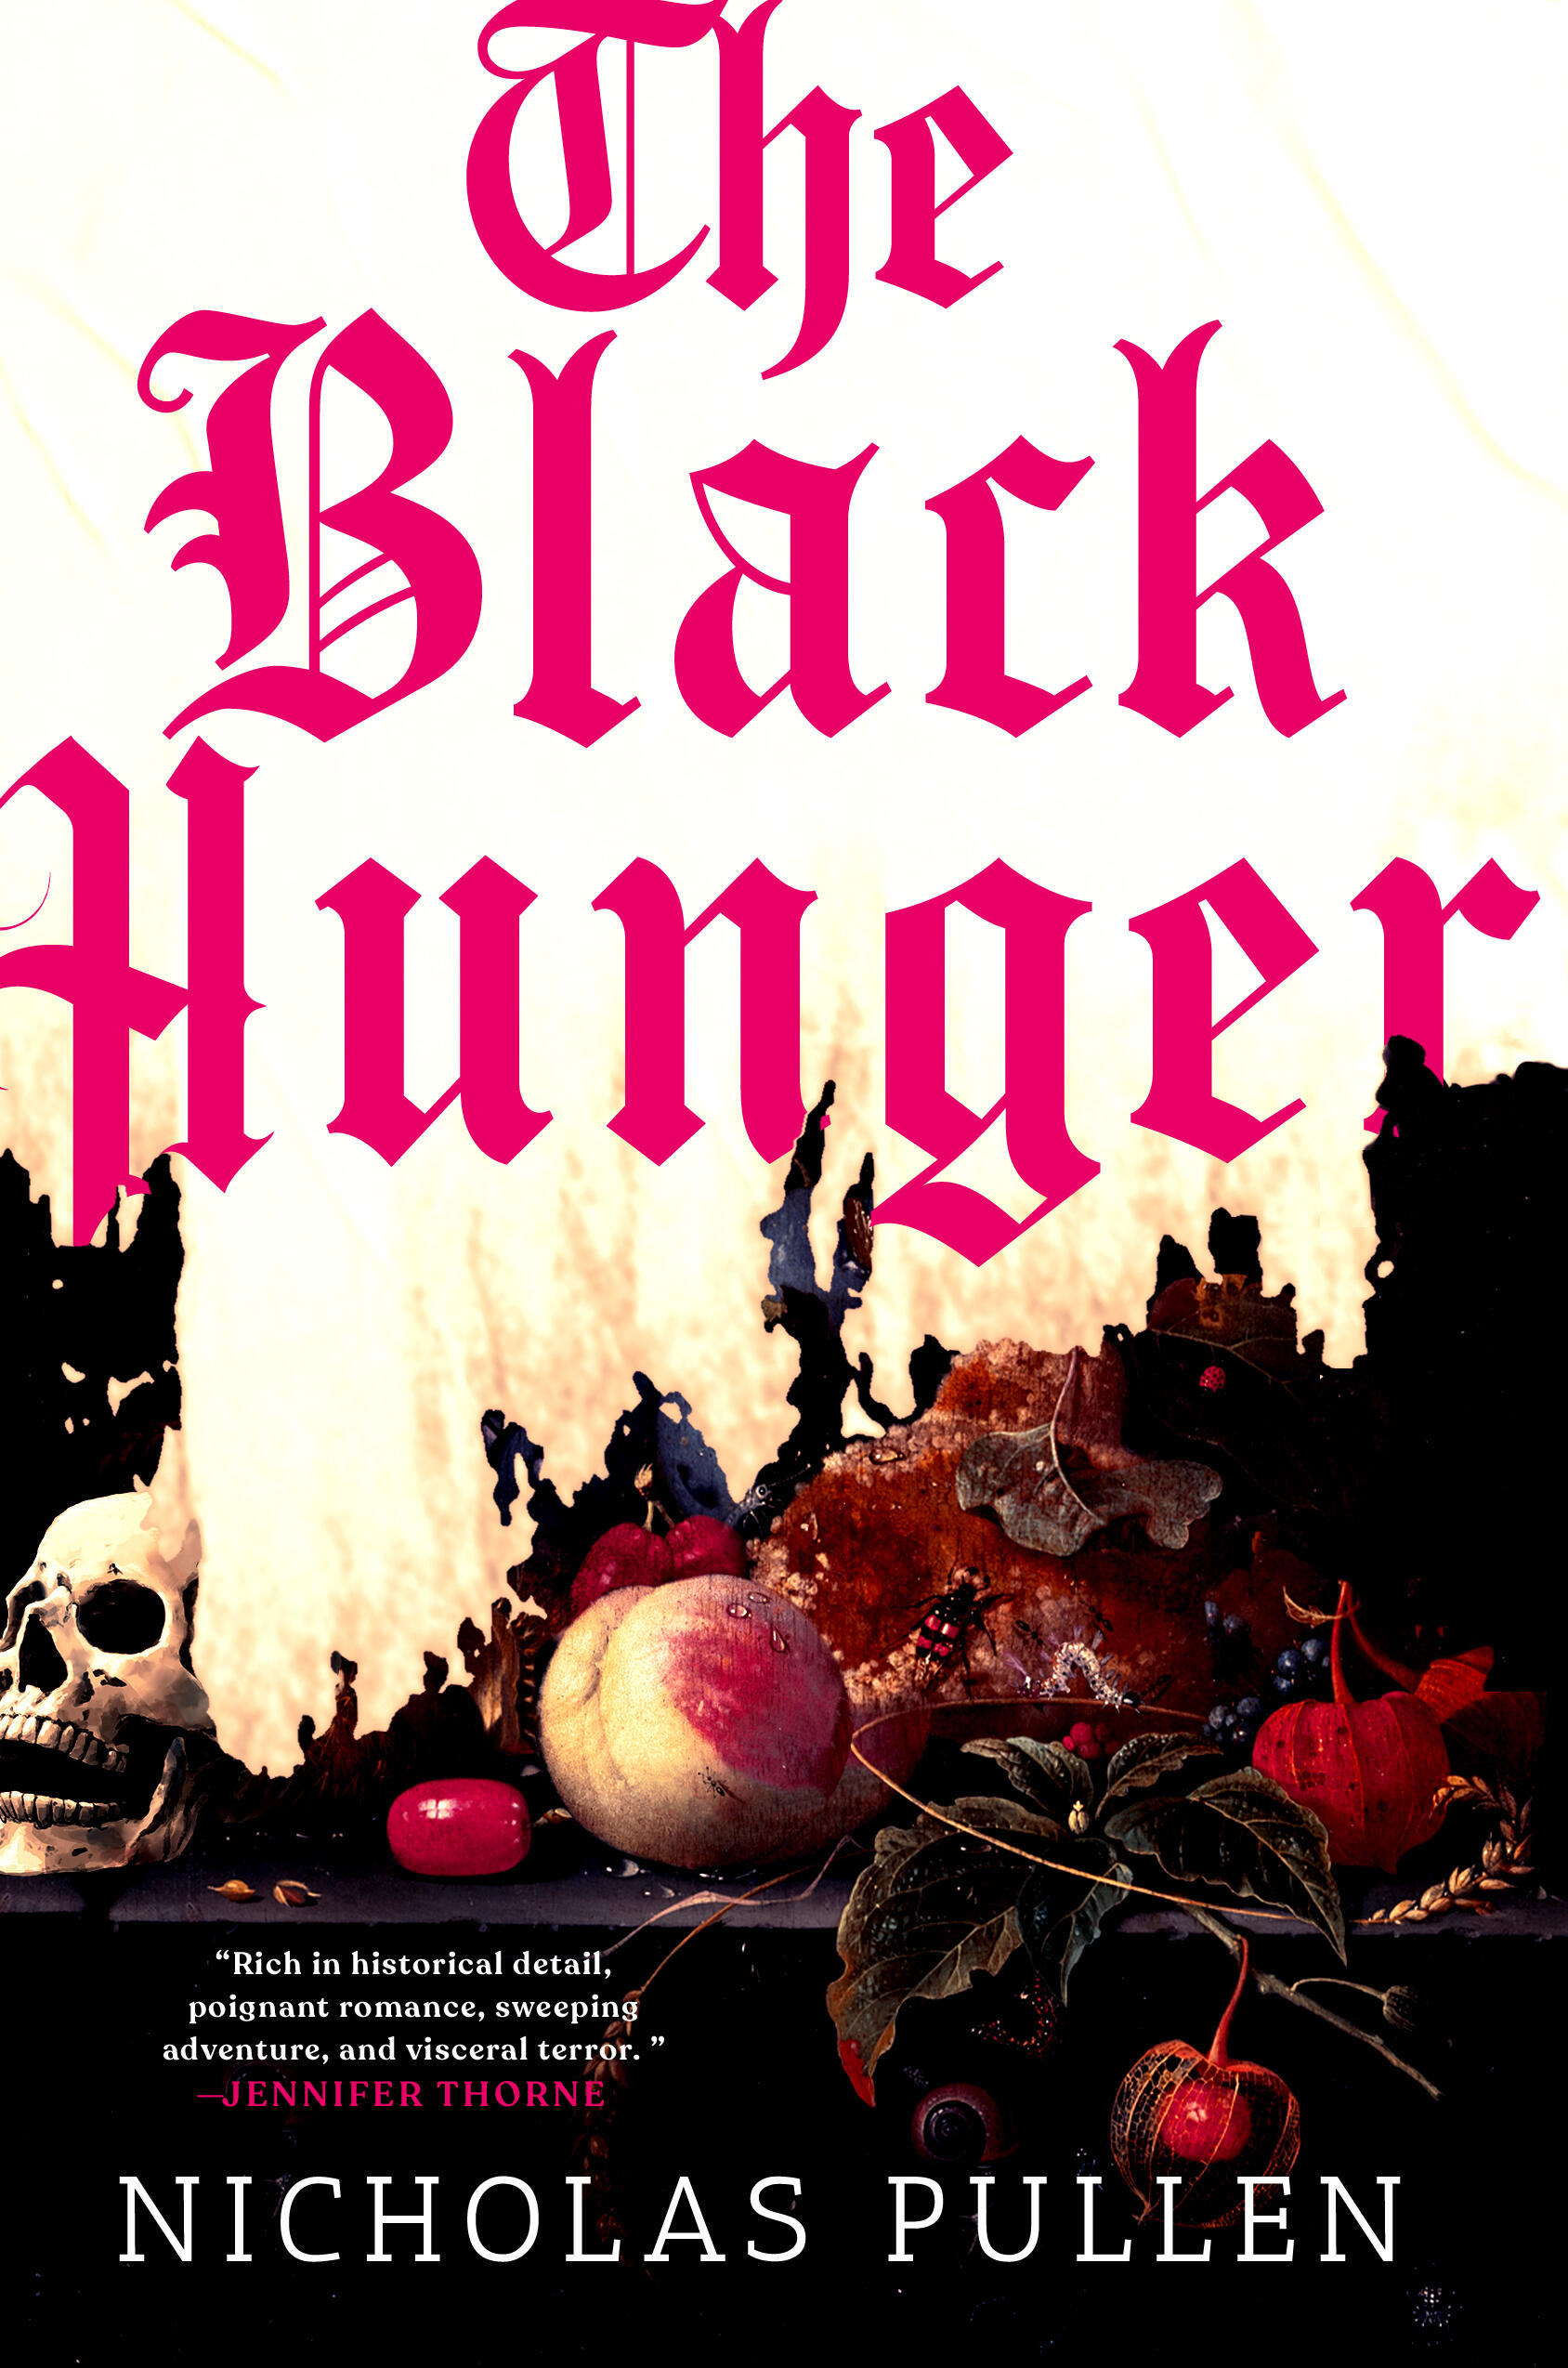 The Black Hunger by Nicholas Pullen